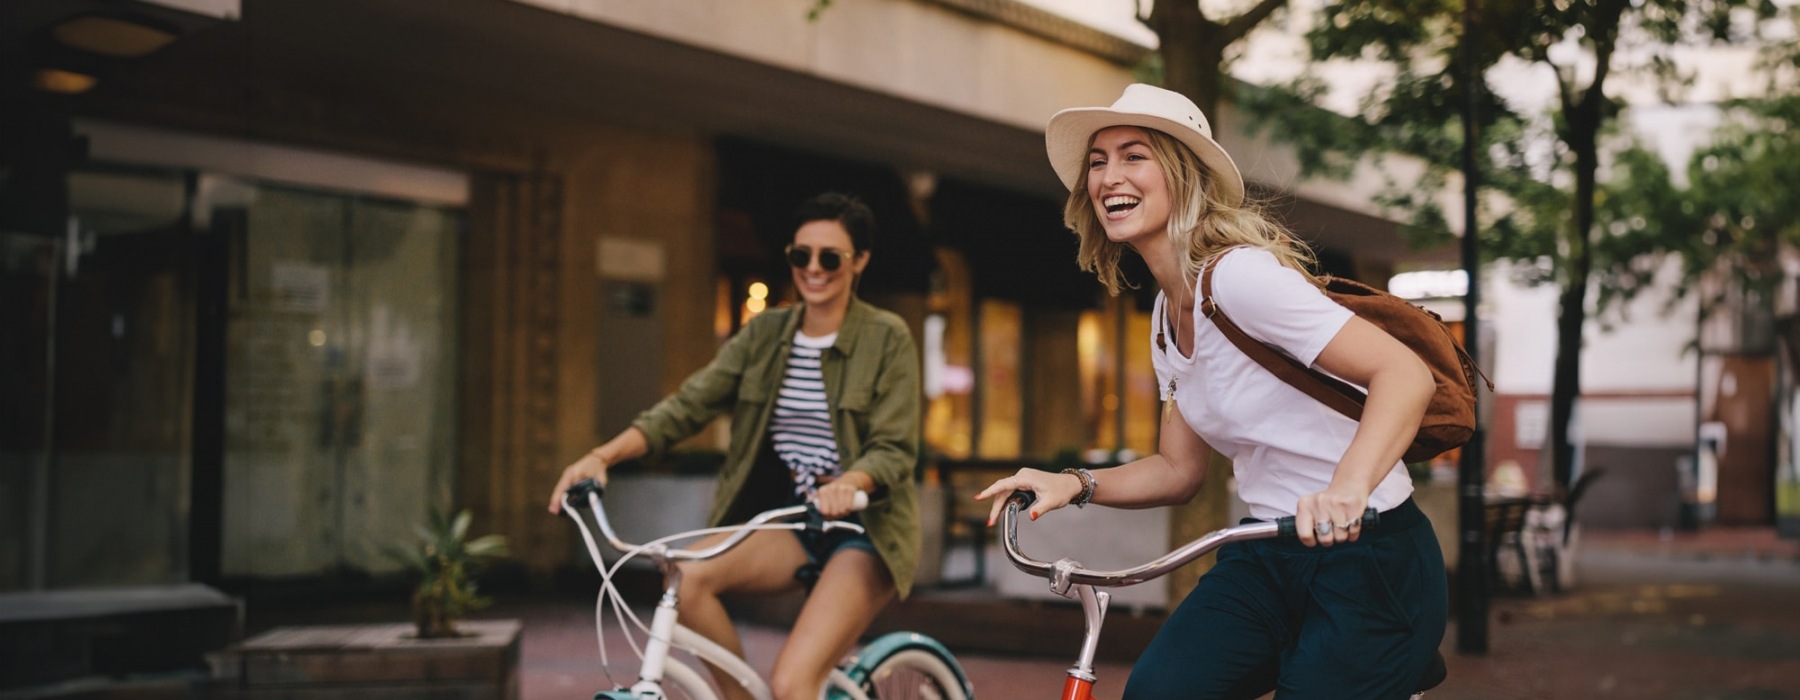 two women on bicycles outdoors